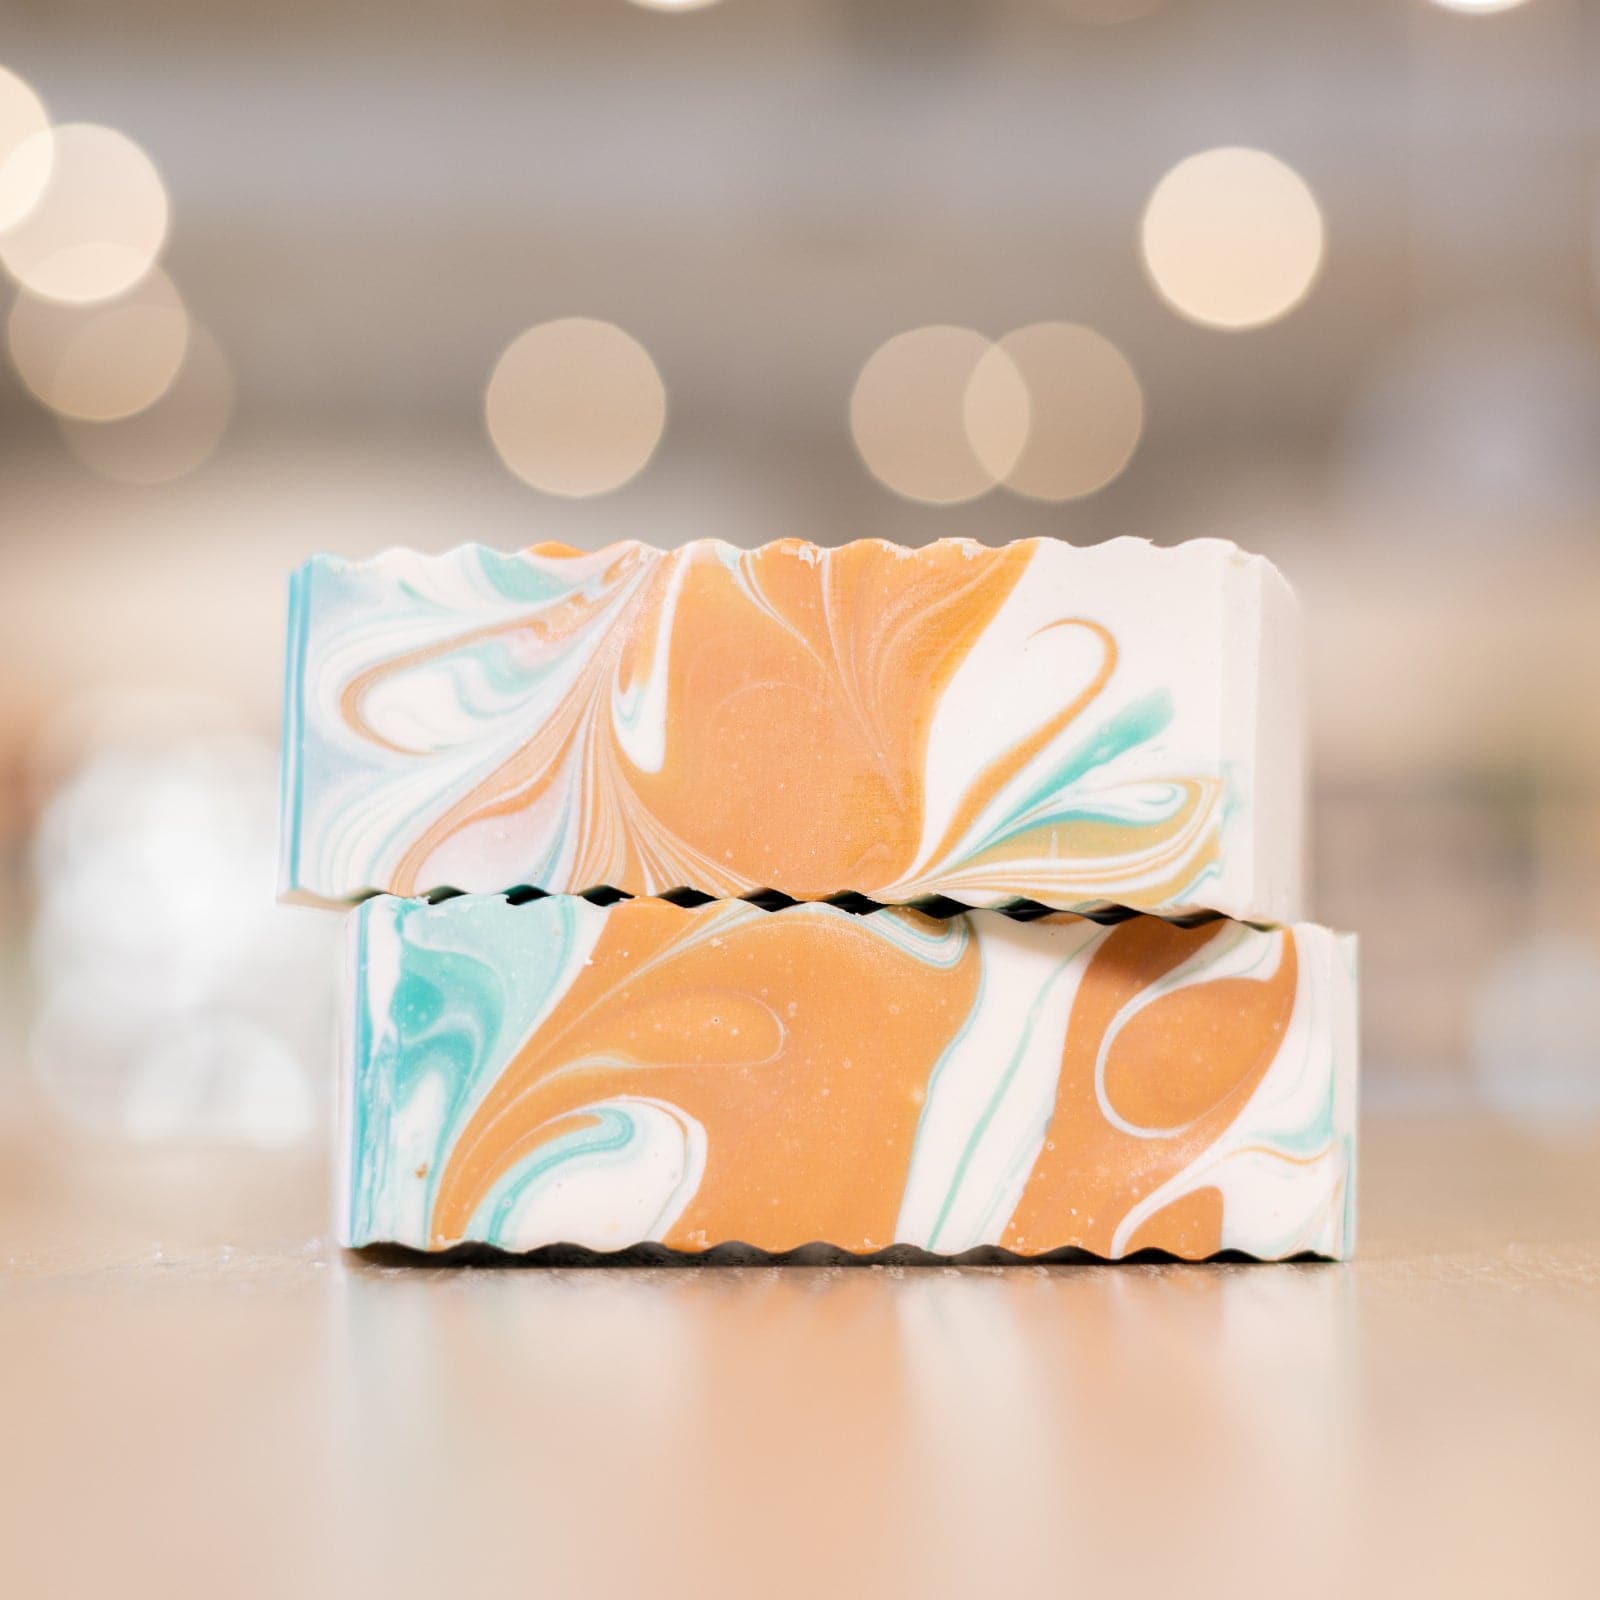 Two Narcissist Soap Bars with white, teal, orange design stacked on each other 